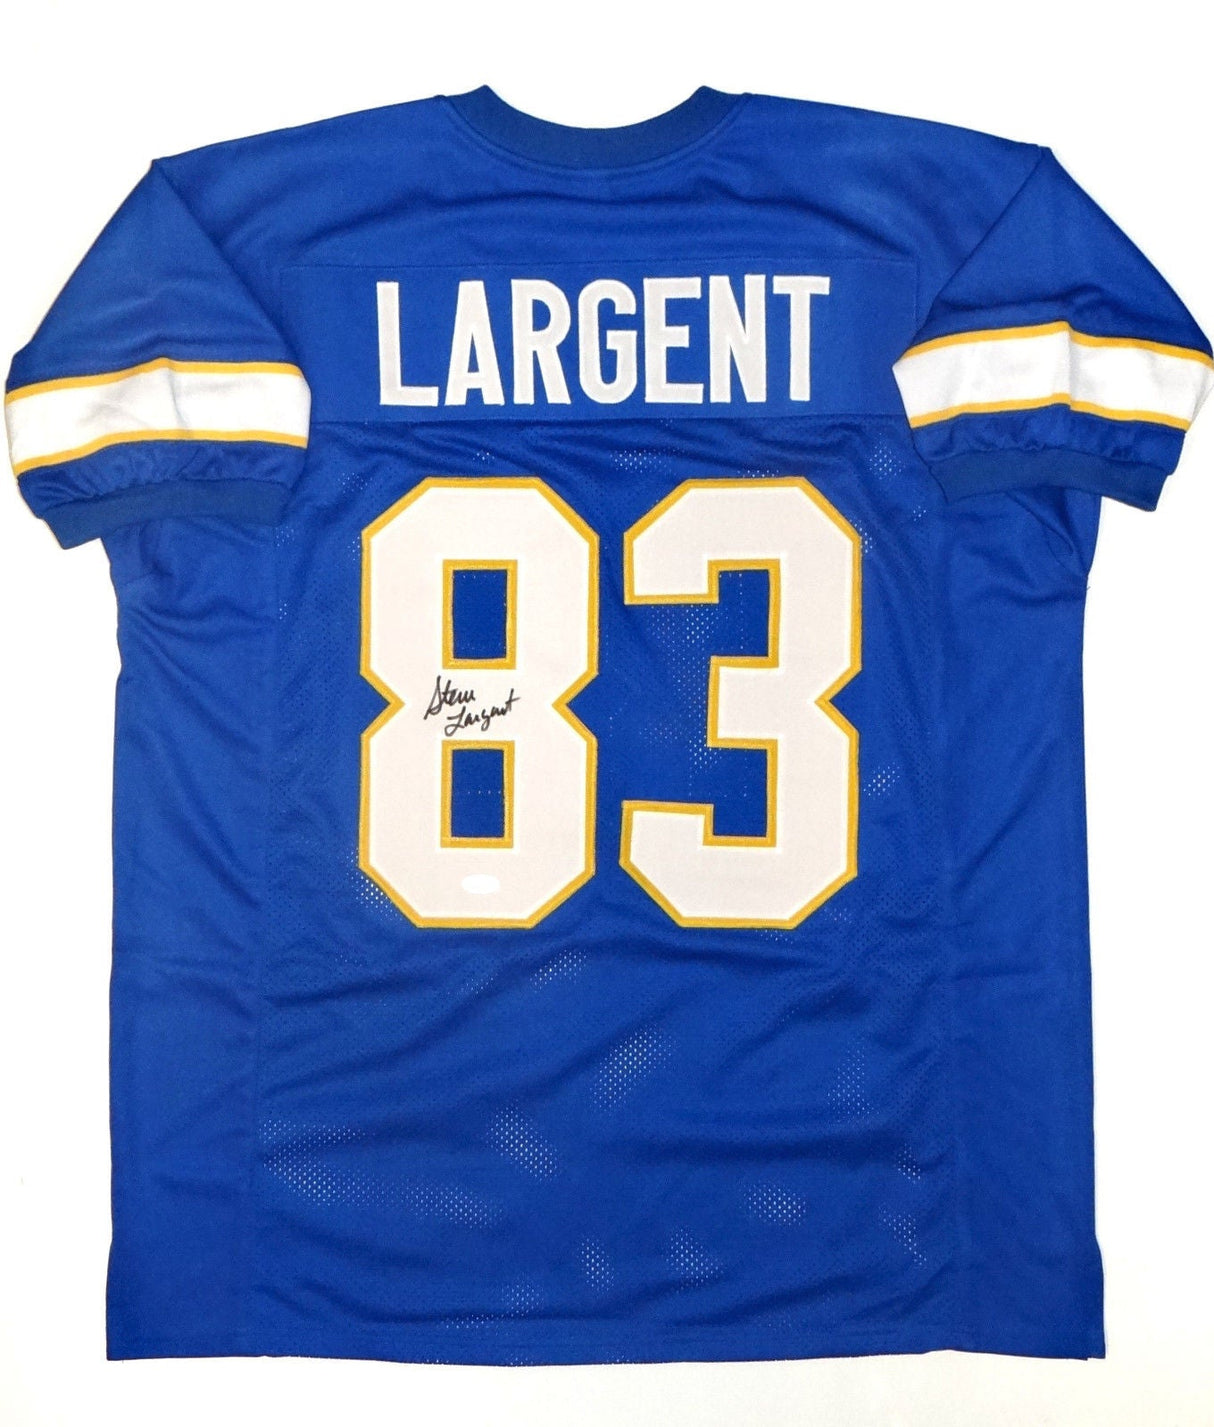 Steve Largent Signed / Autographed Blue W/ Yellow Jersey- JSA W Authenticated